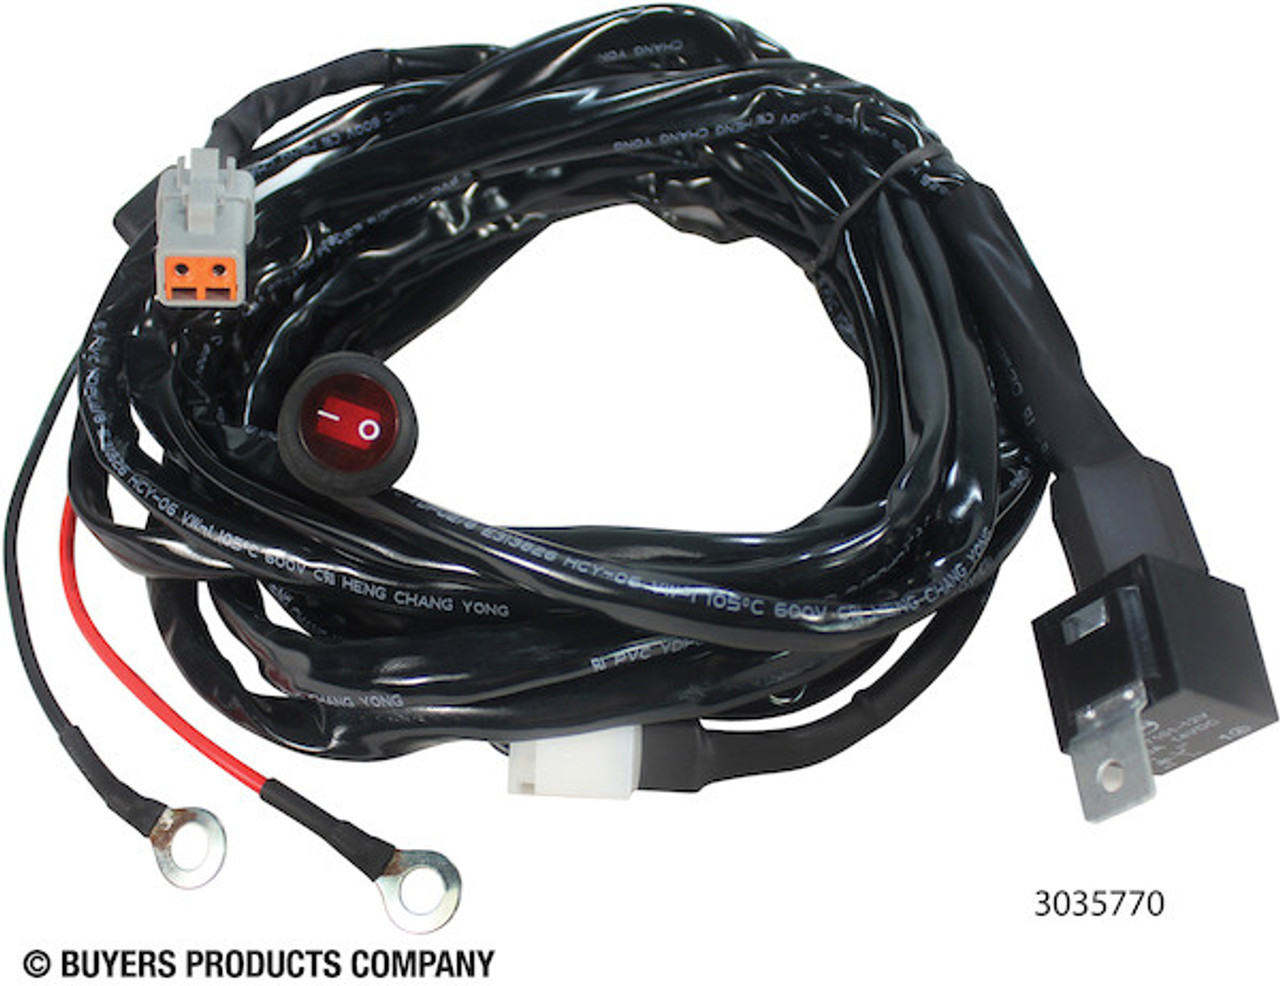 3035770 - Wire Harness with Switch for 1492163, 1492165 Light Bars - ATP Connection